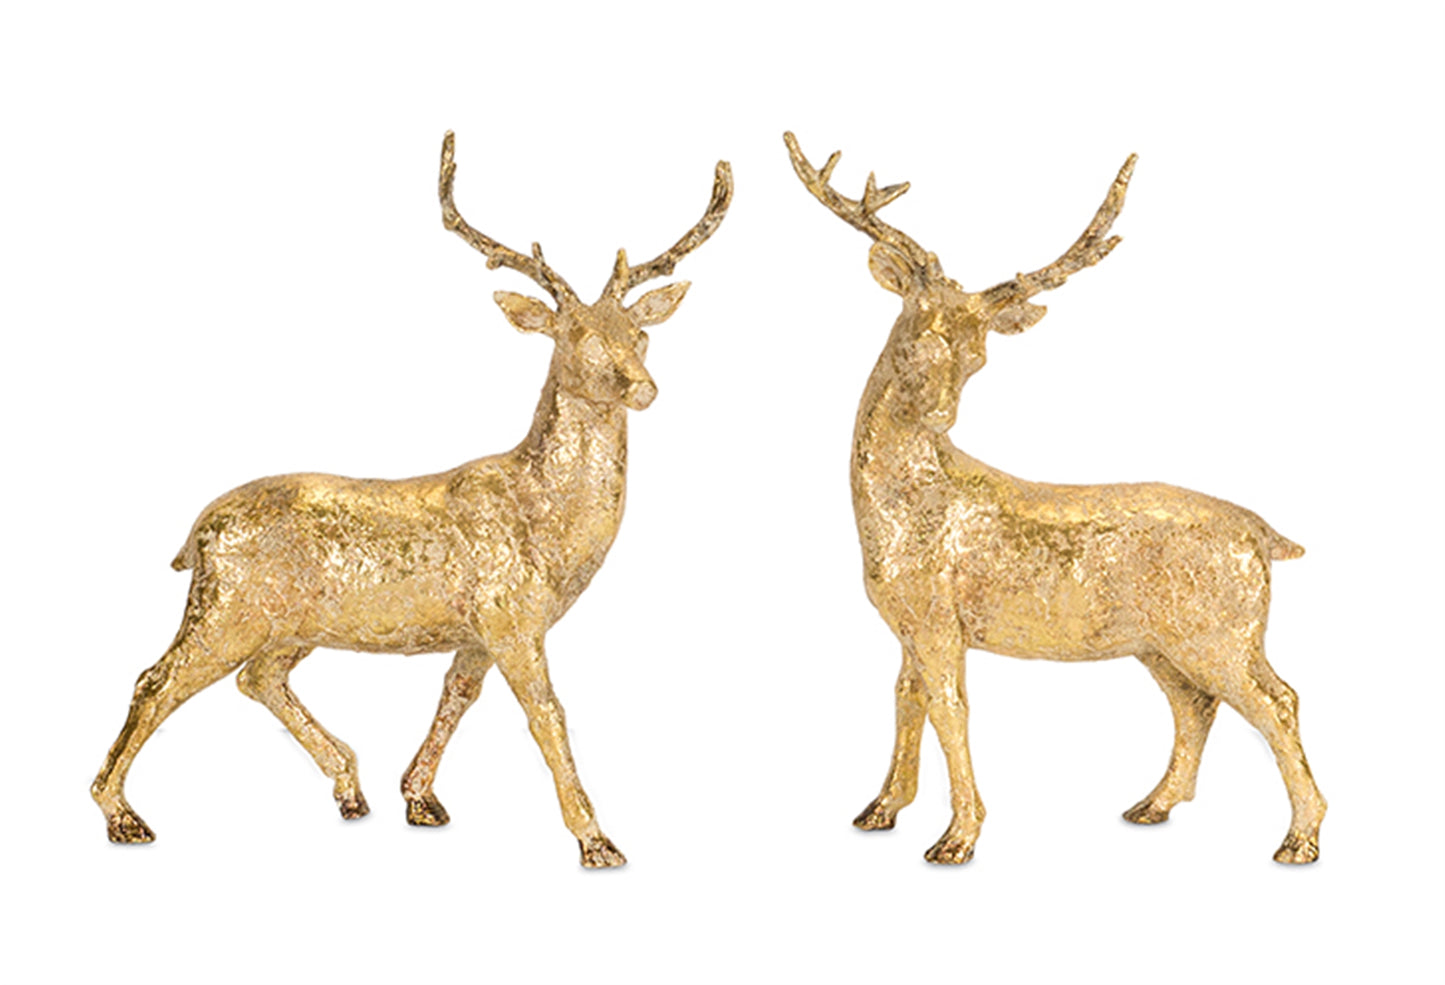 Holiday Deer Figurine with Gold Finish (Set of 2)